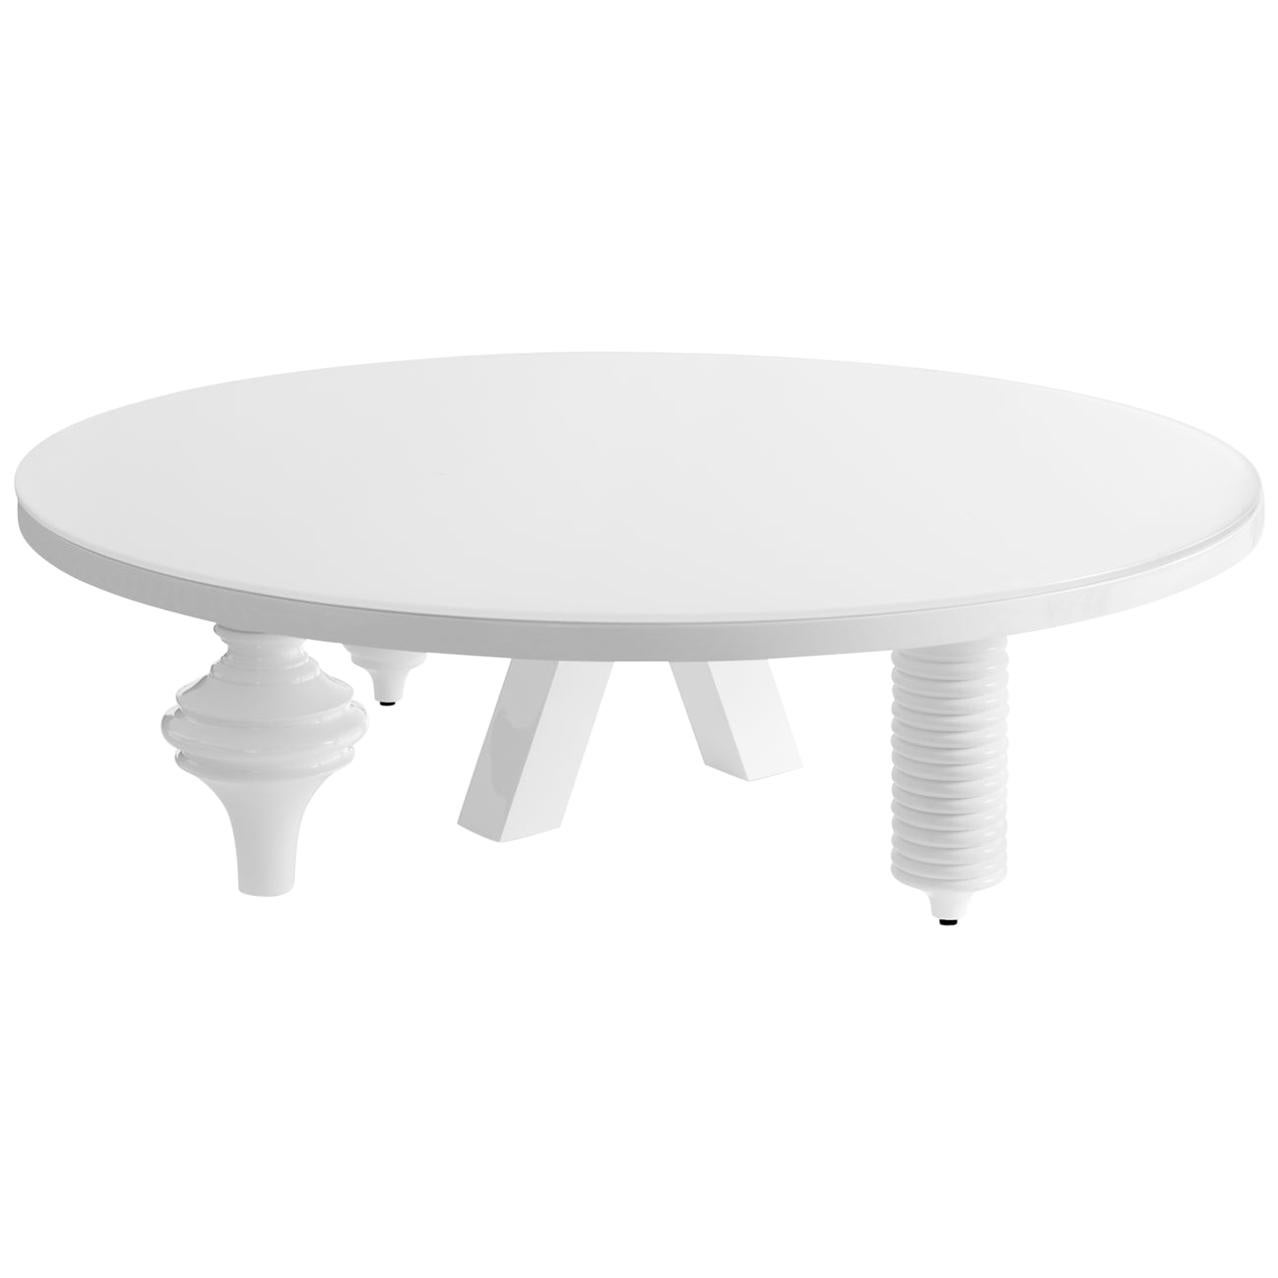 Contemporary round low coffee table model "Multileg" by Jaime Hayon white gloss For Sale